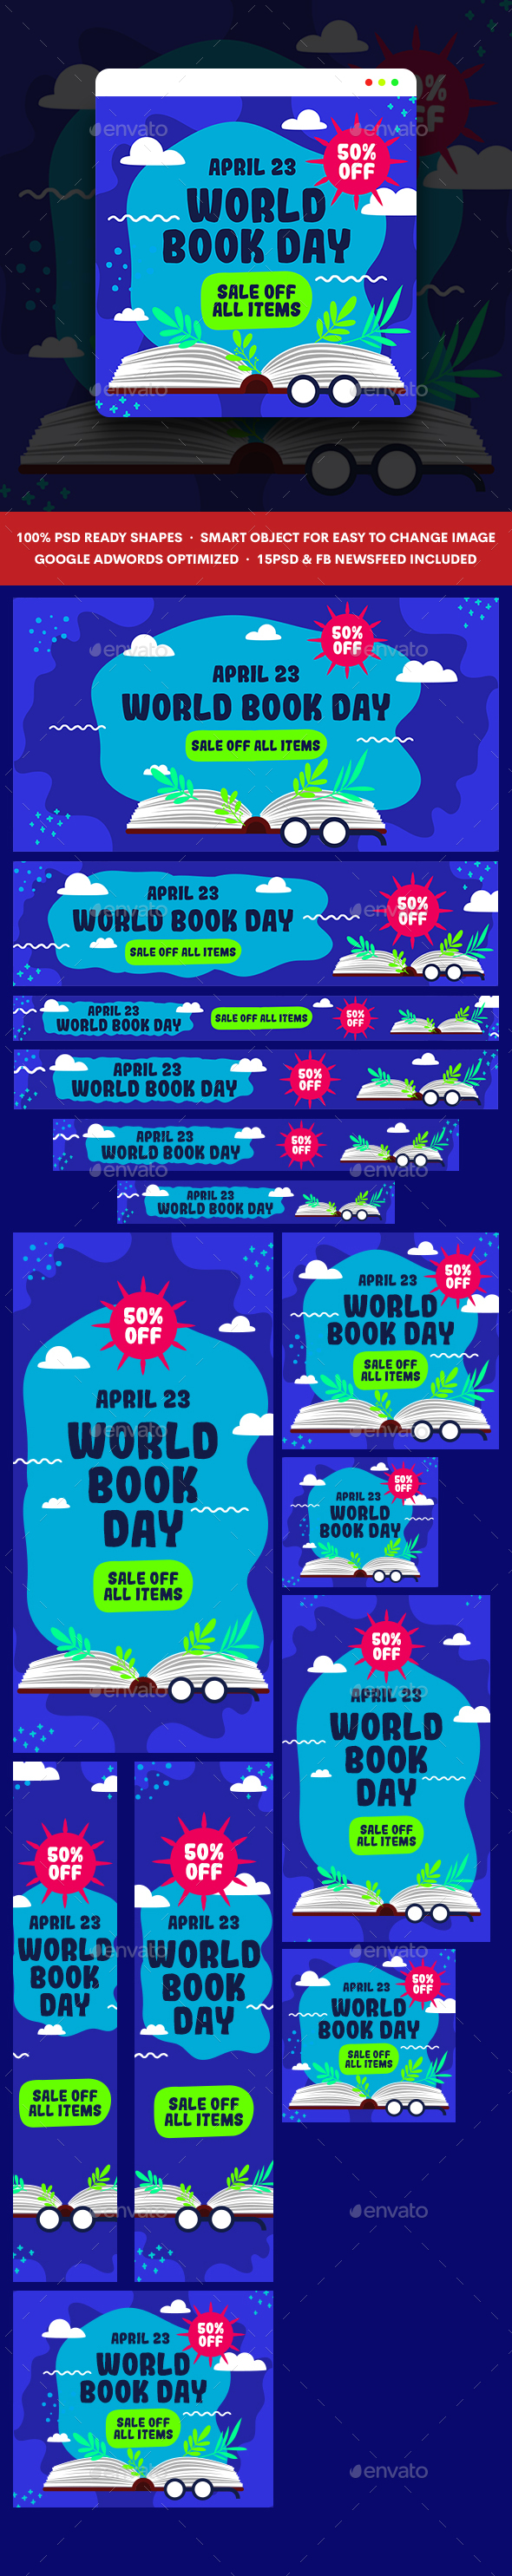 World Book Day Banners Ad